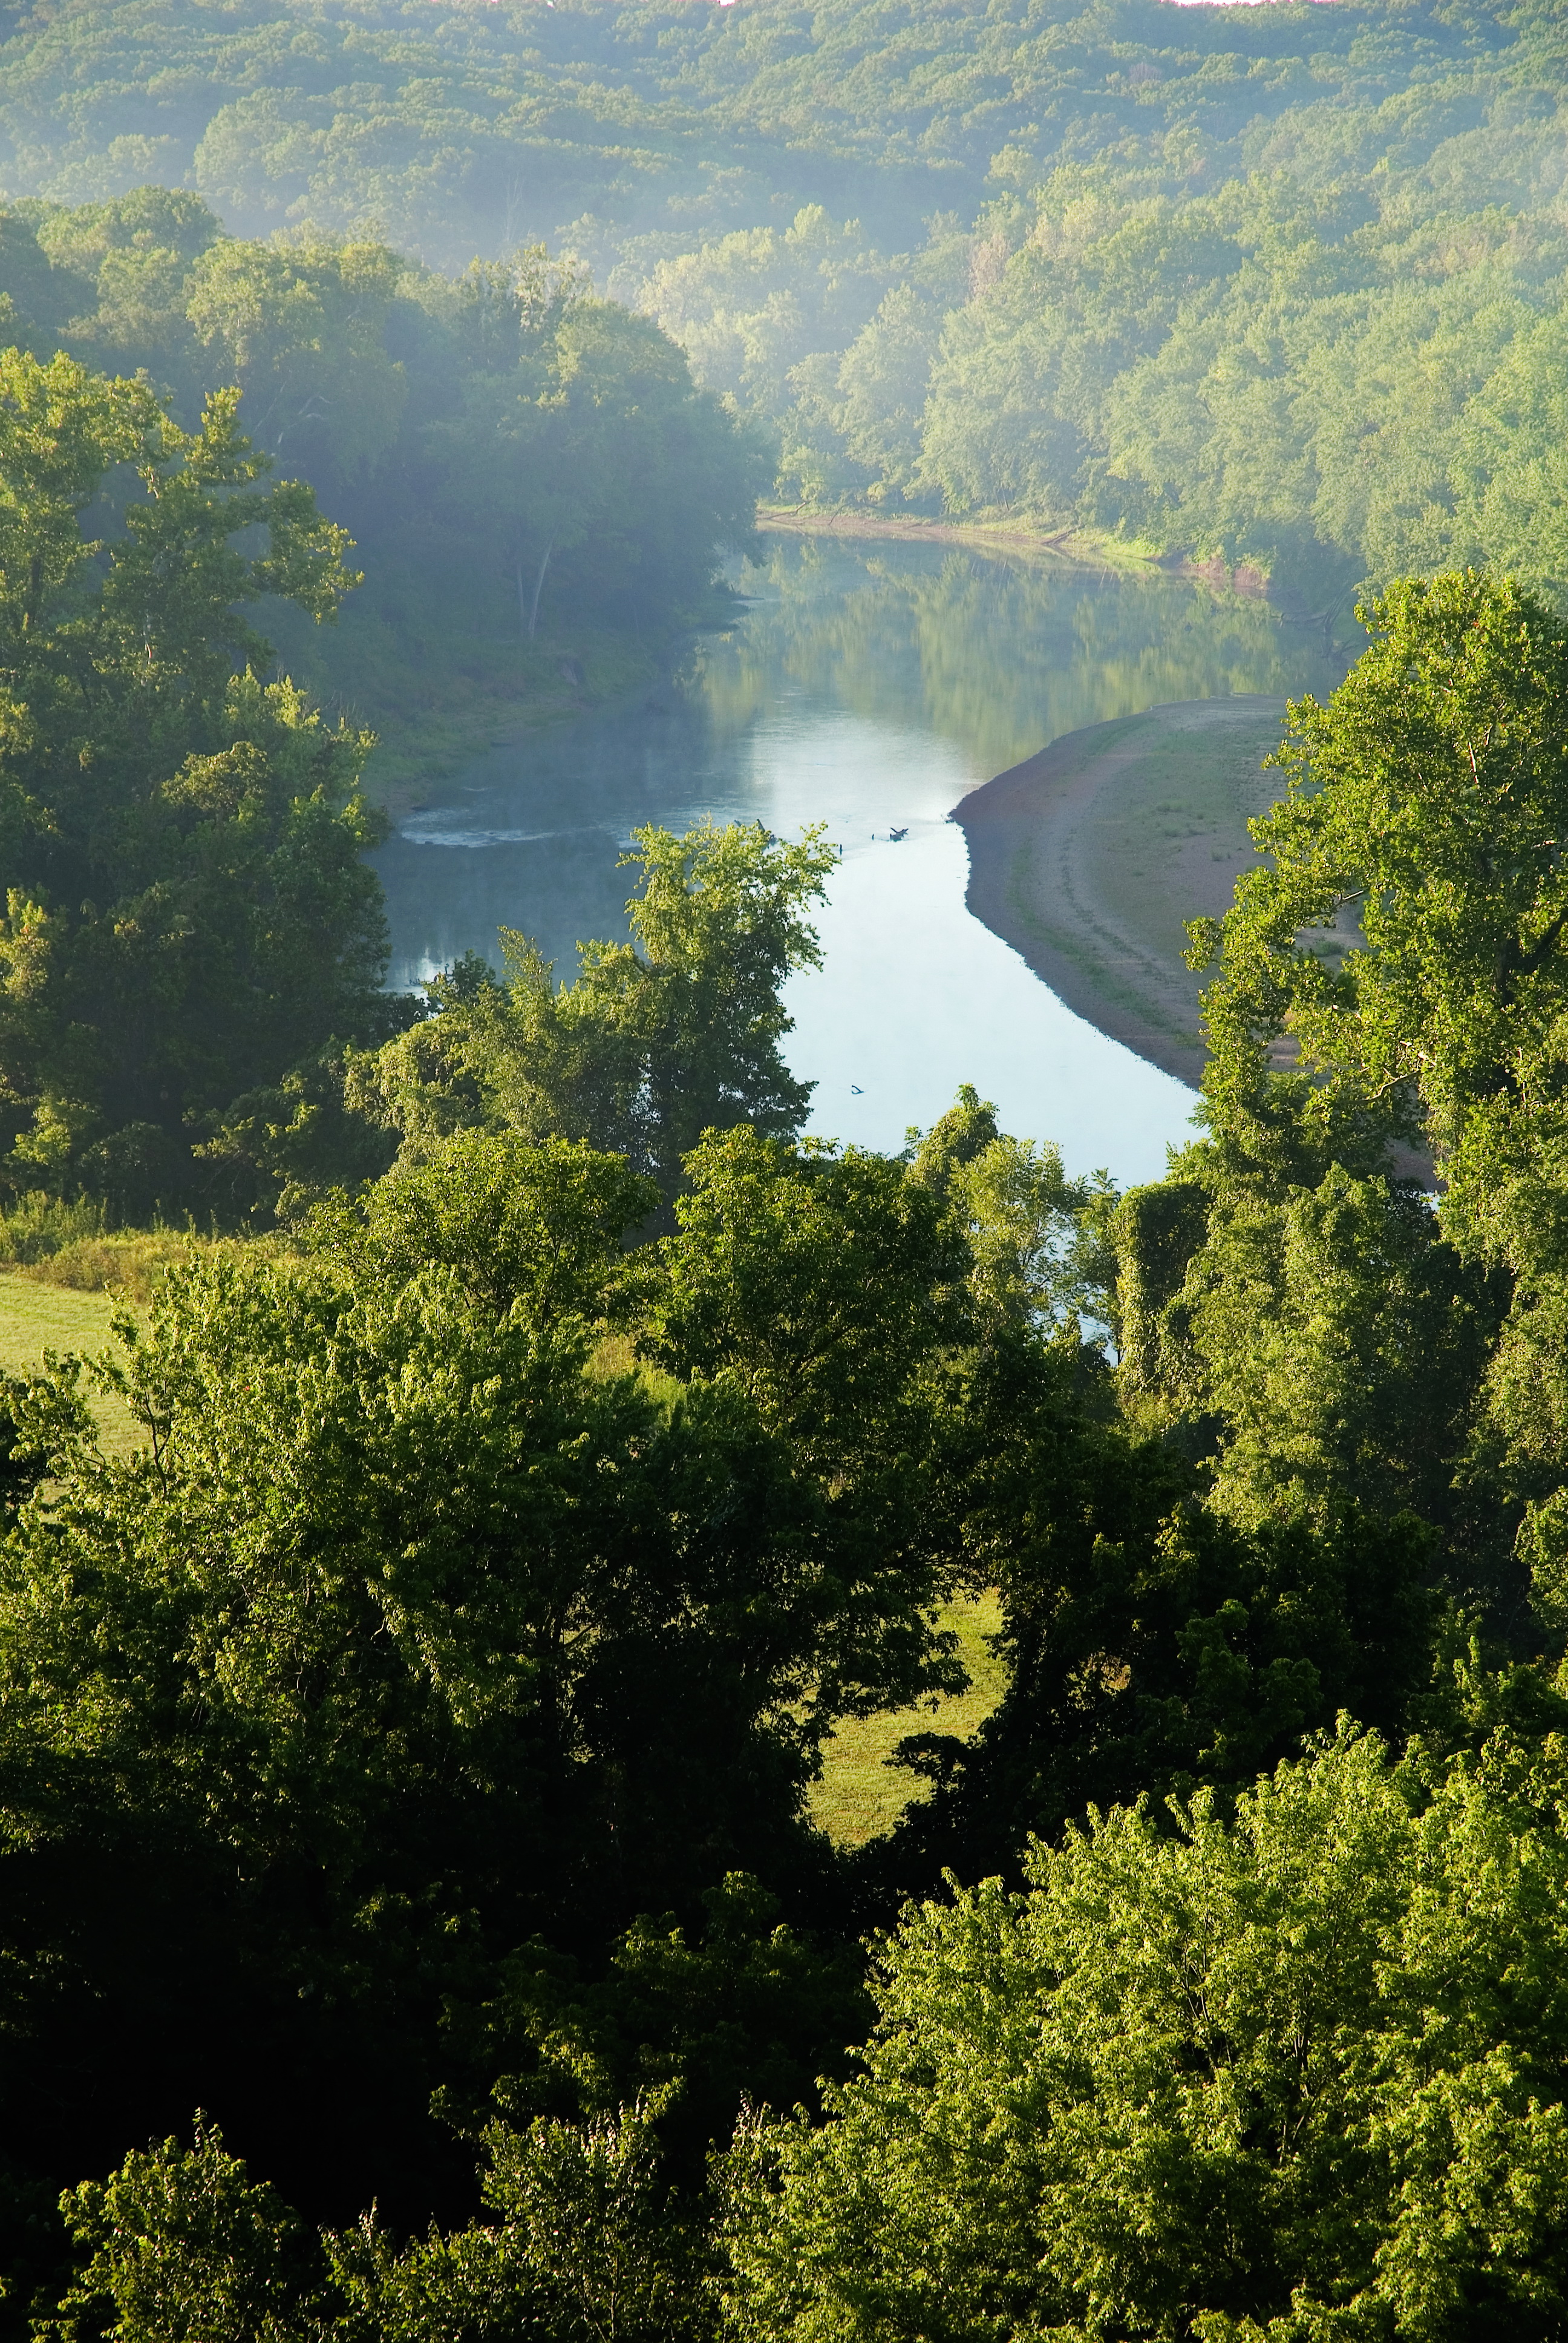 view of the Meramec River from a bluff top